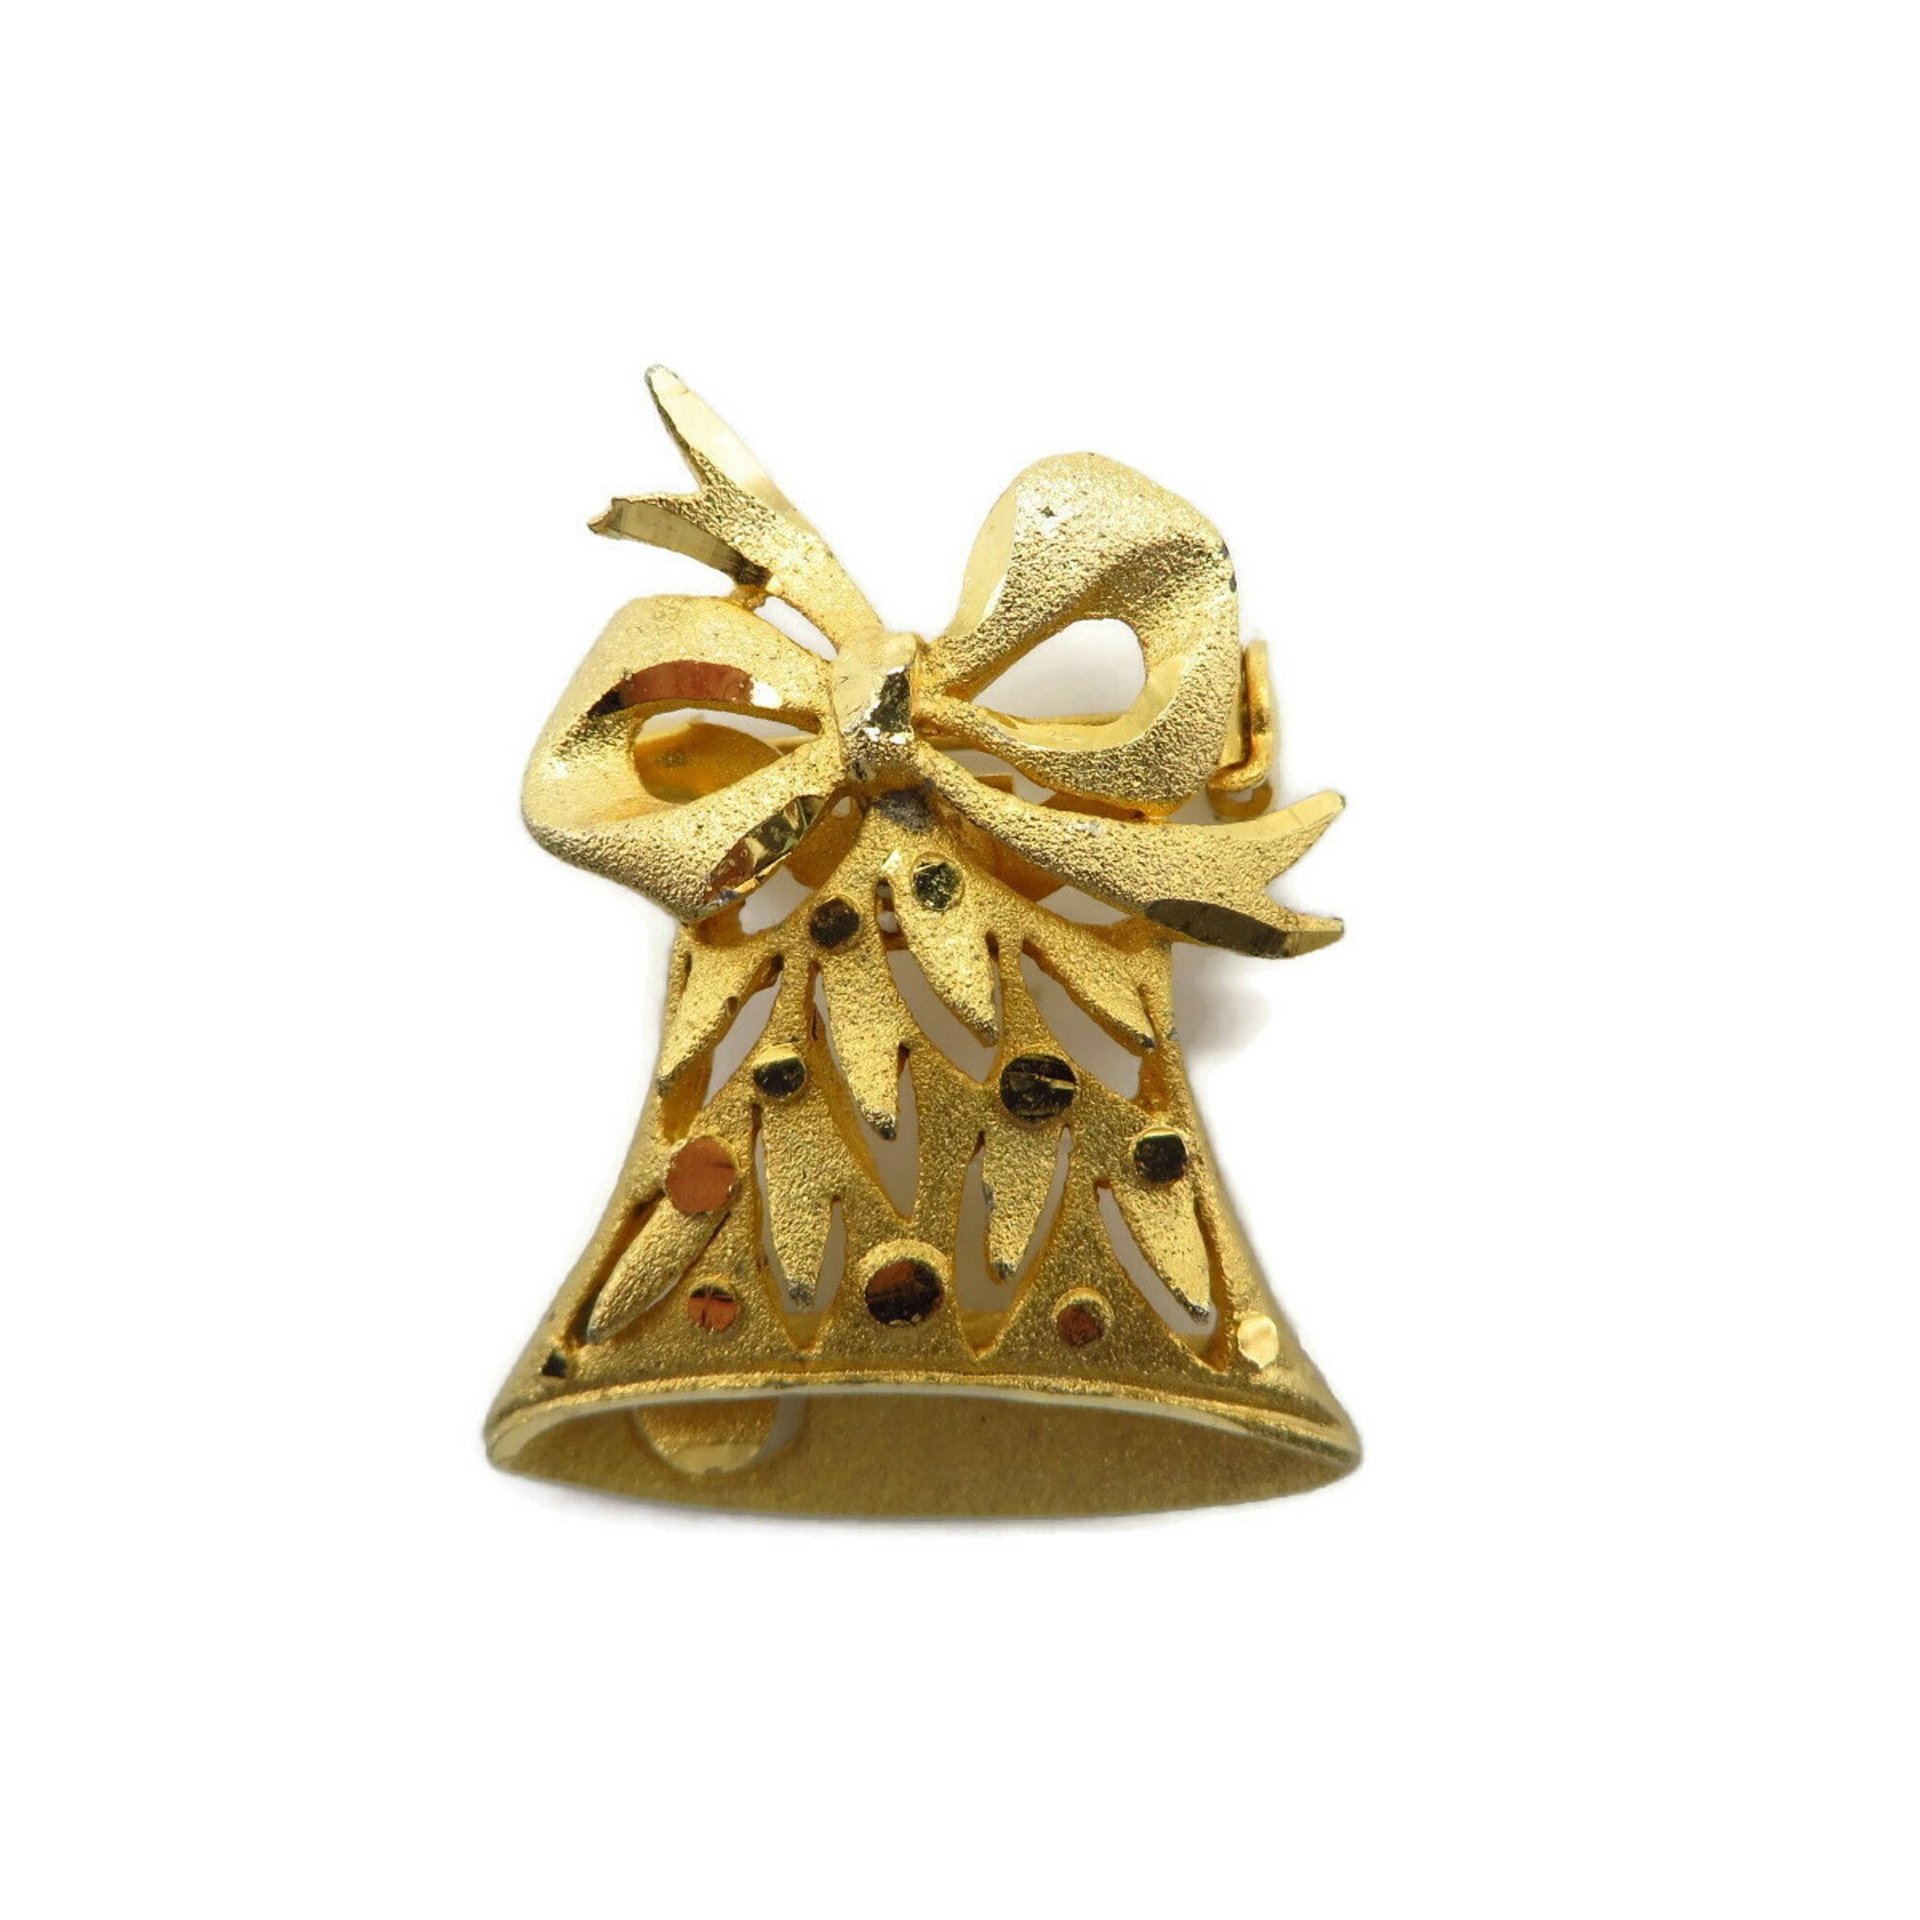 Vintage Gold Bell Bow Topped Christmas Brooch